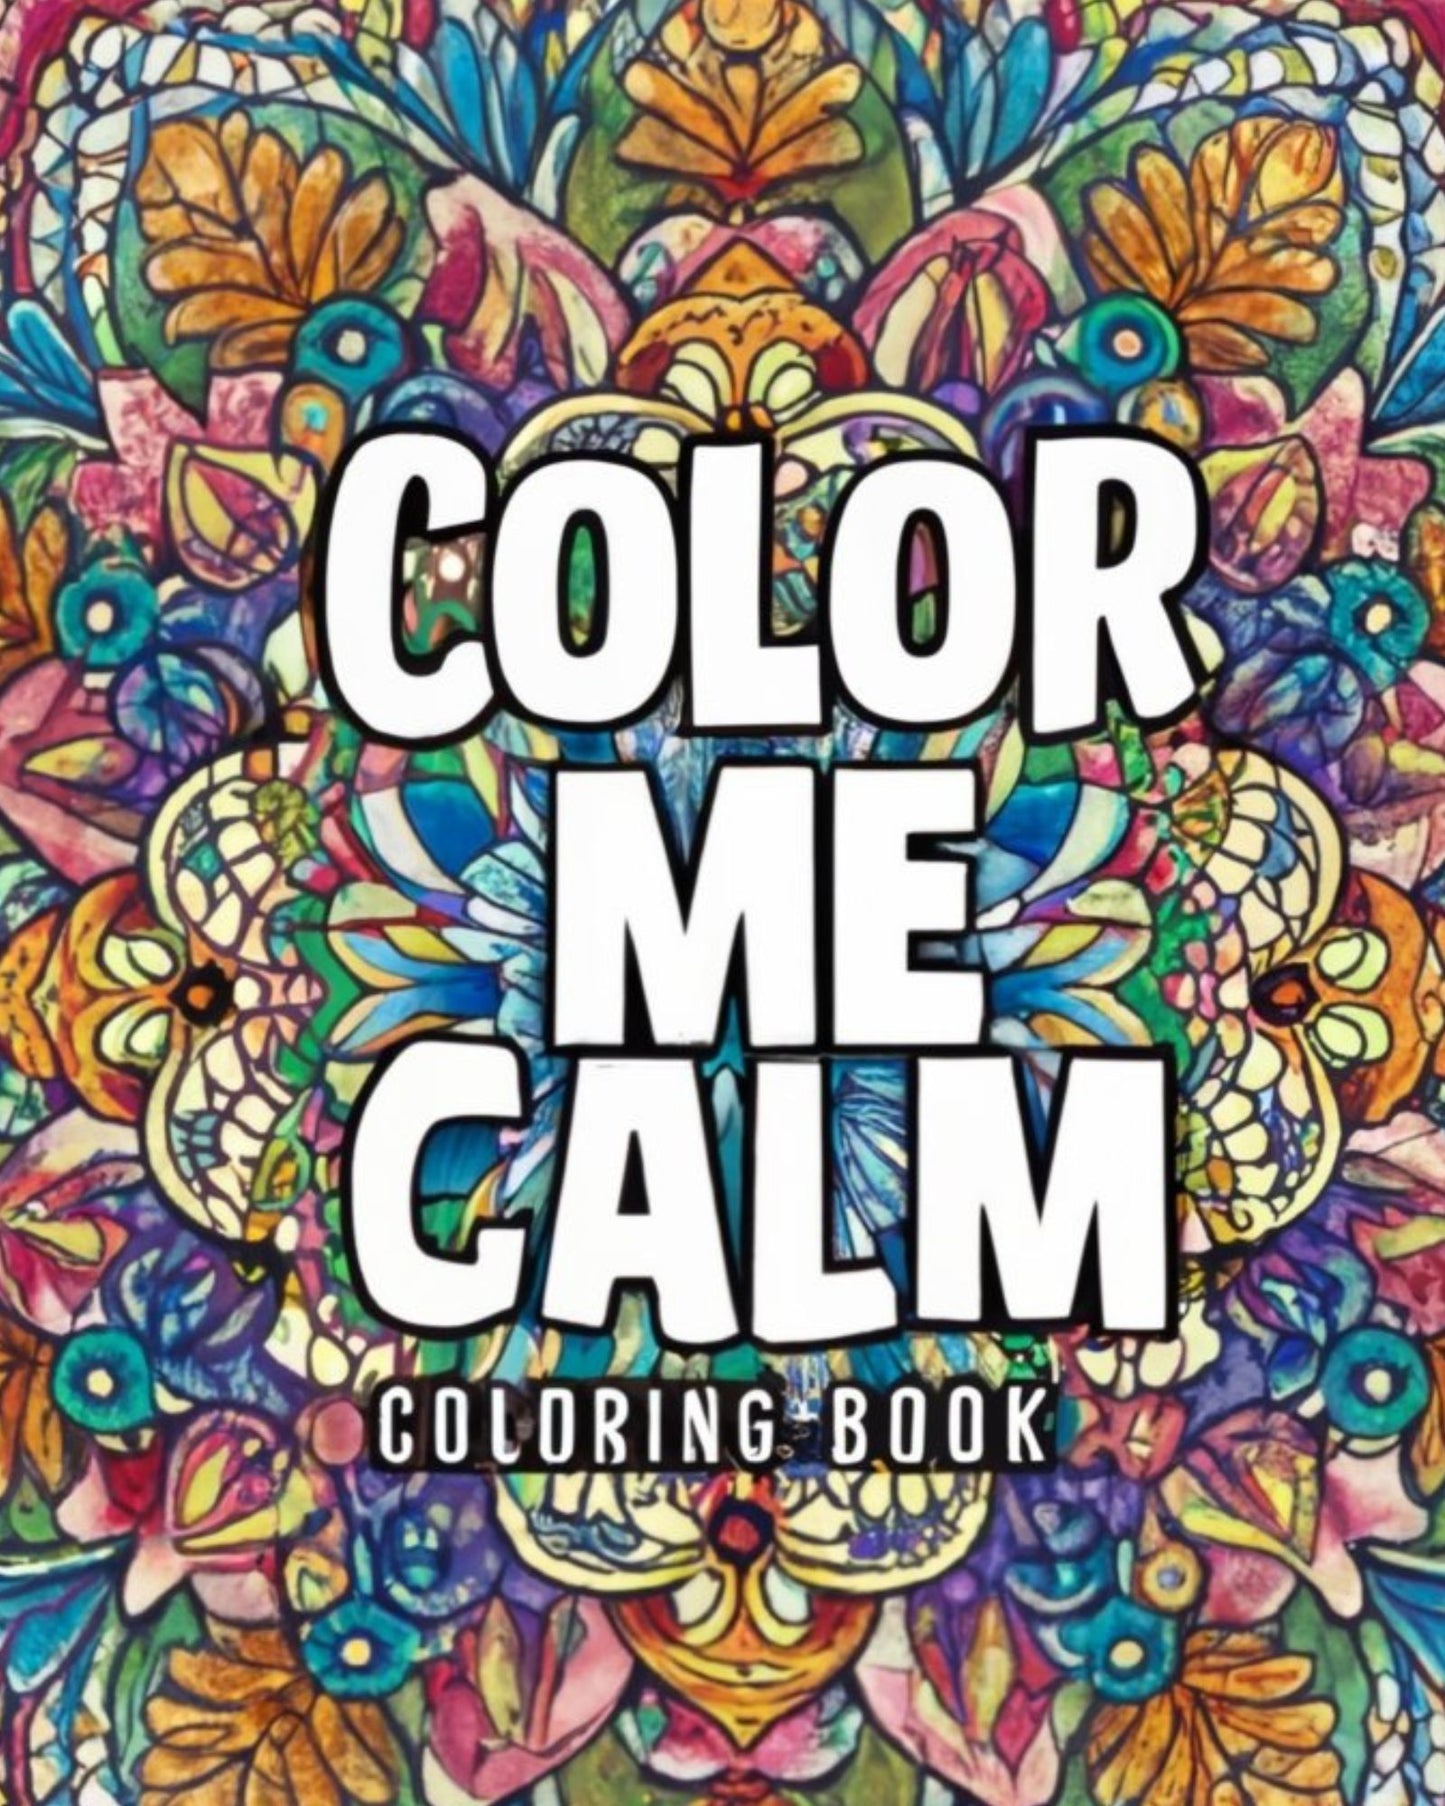 Color me Calm: Adult Coloring Book (Adult Coloring Books - Stress Relief and Self Care) Paperback